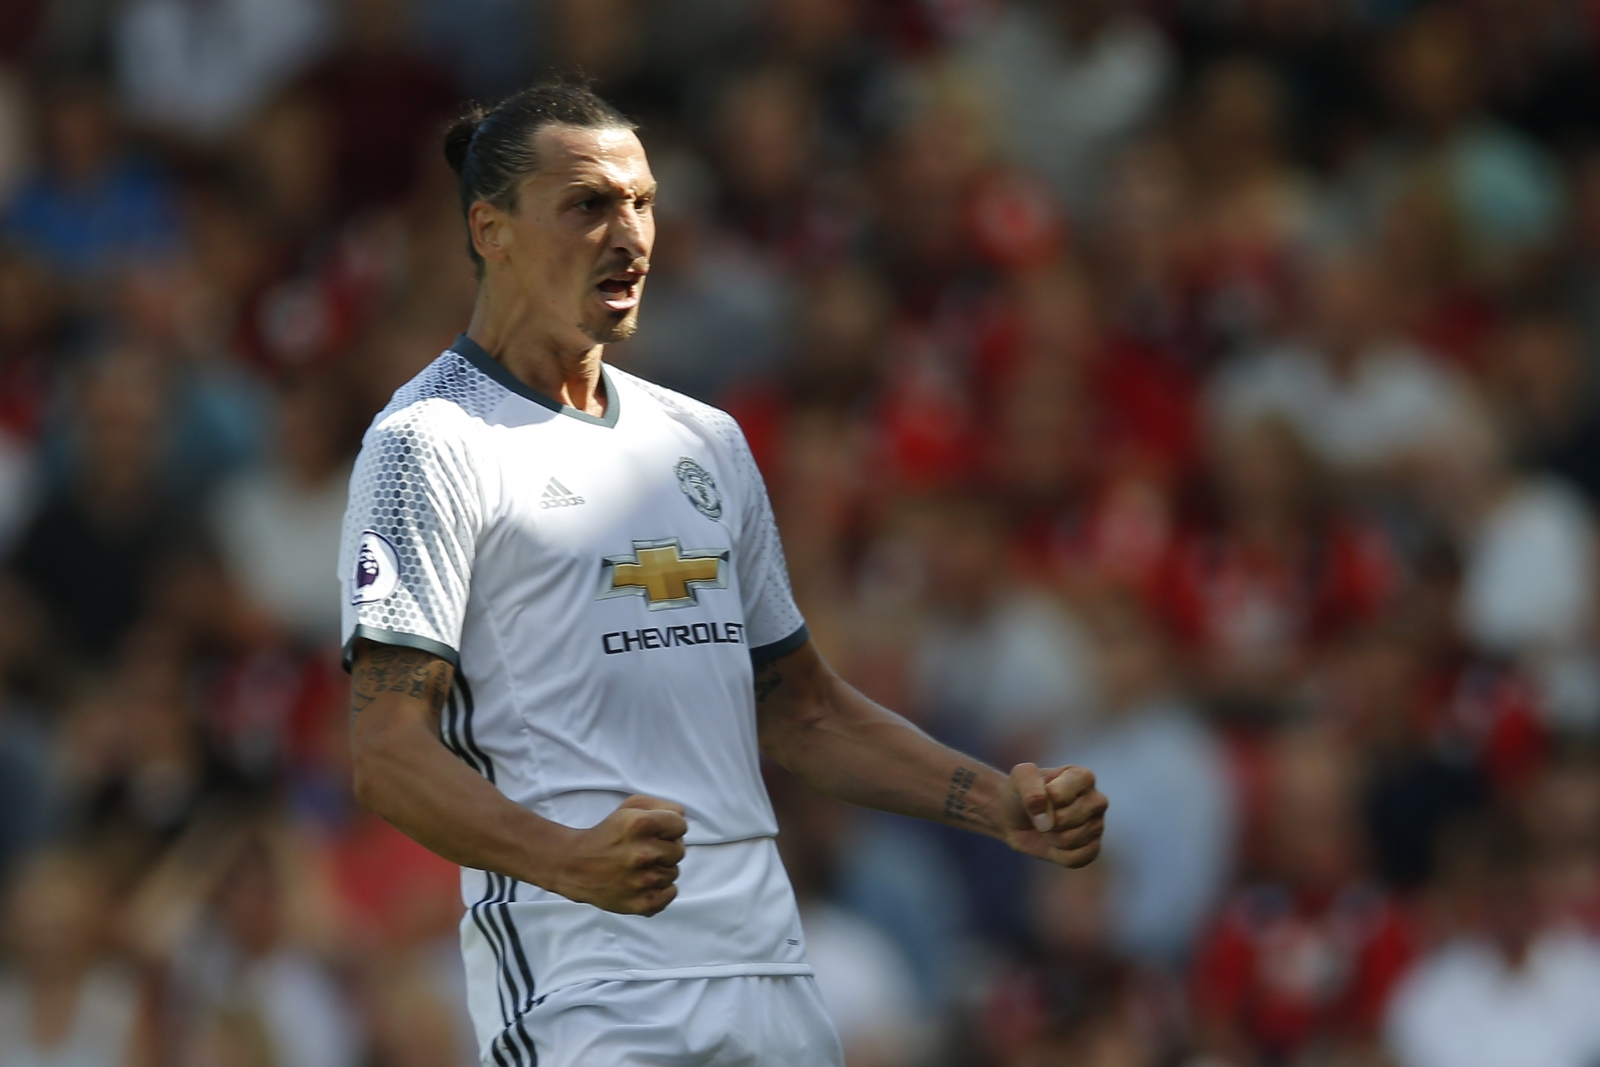 Bournemouth 1-3 Manchester United: Premier League - Ibrahimovic goal delivers Mourinho ...